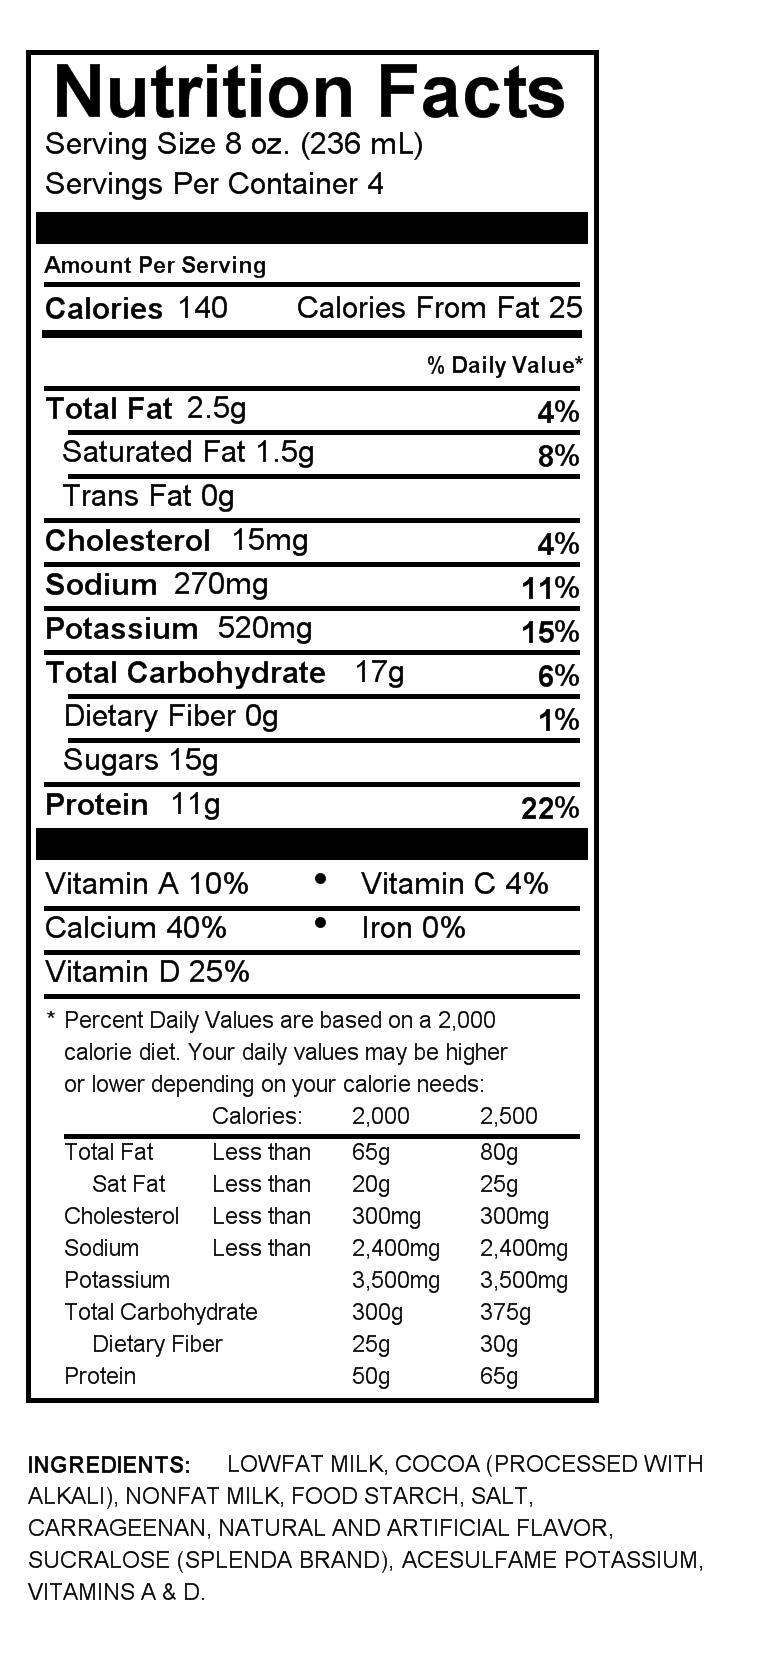 Nutrition Facts Fat 27